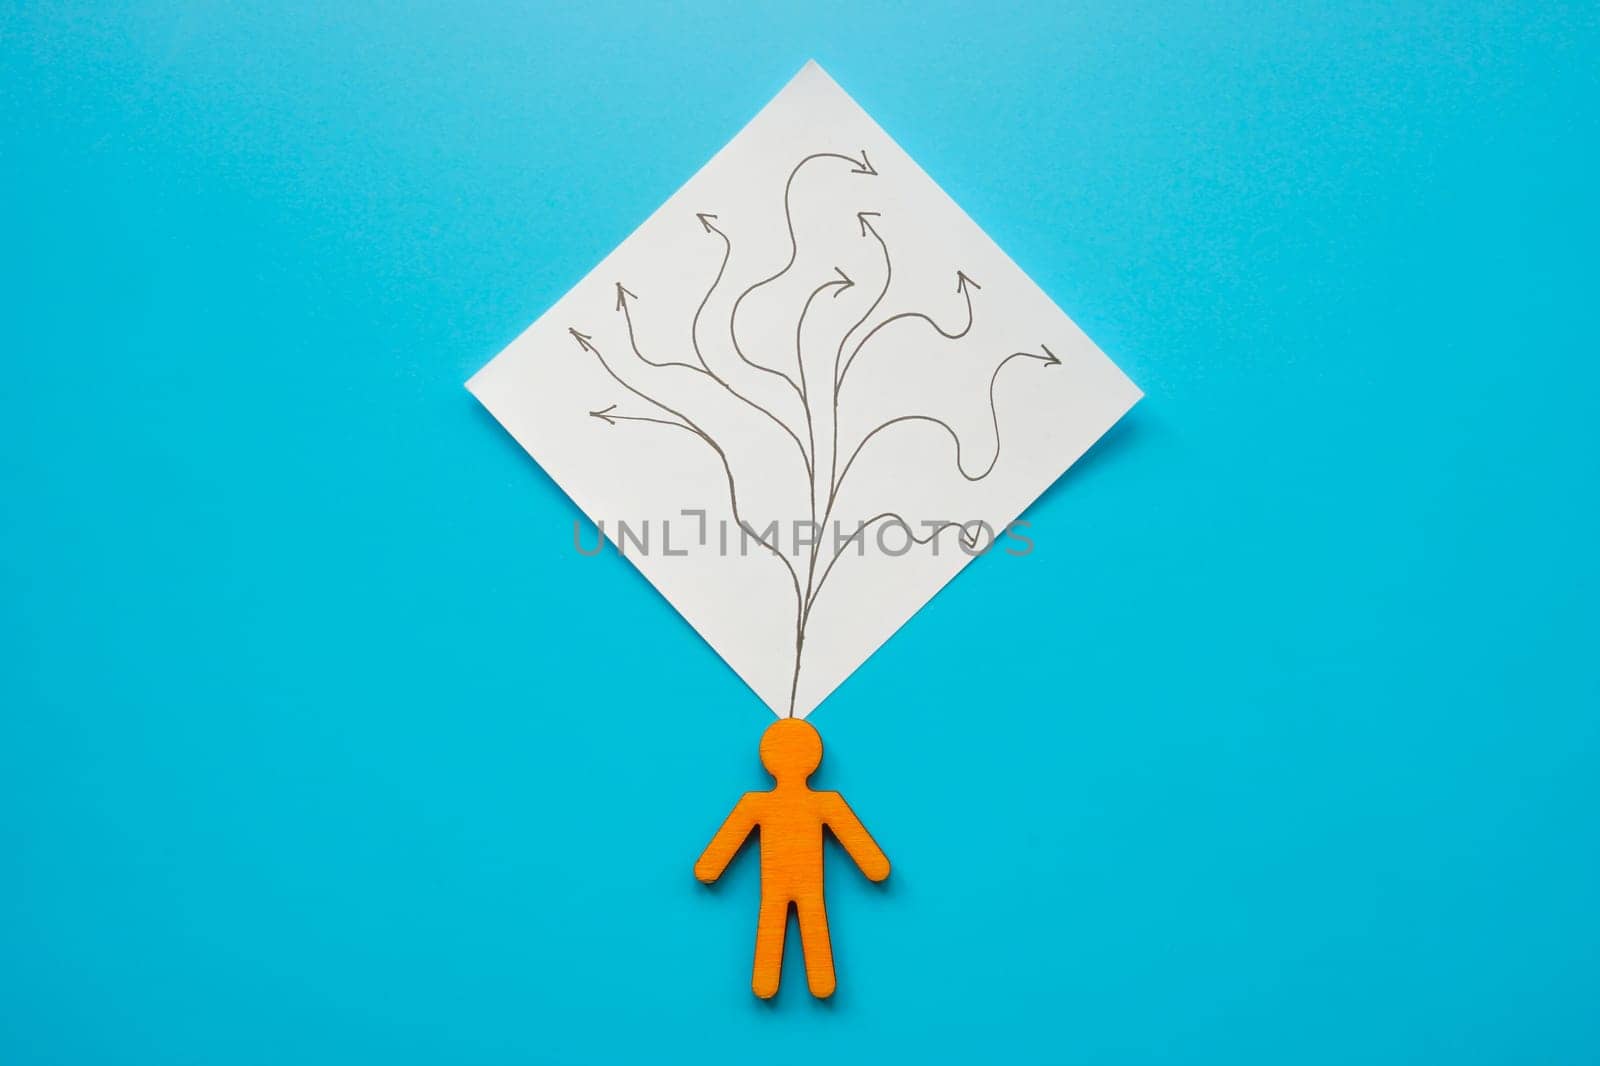 A figurine with drawn arrows as symbol of thinking, doubt, and choosing the right option.